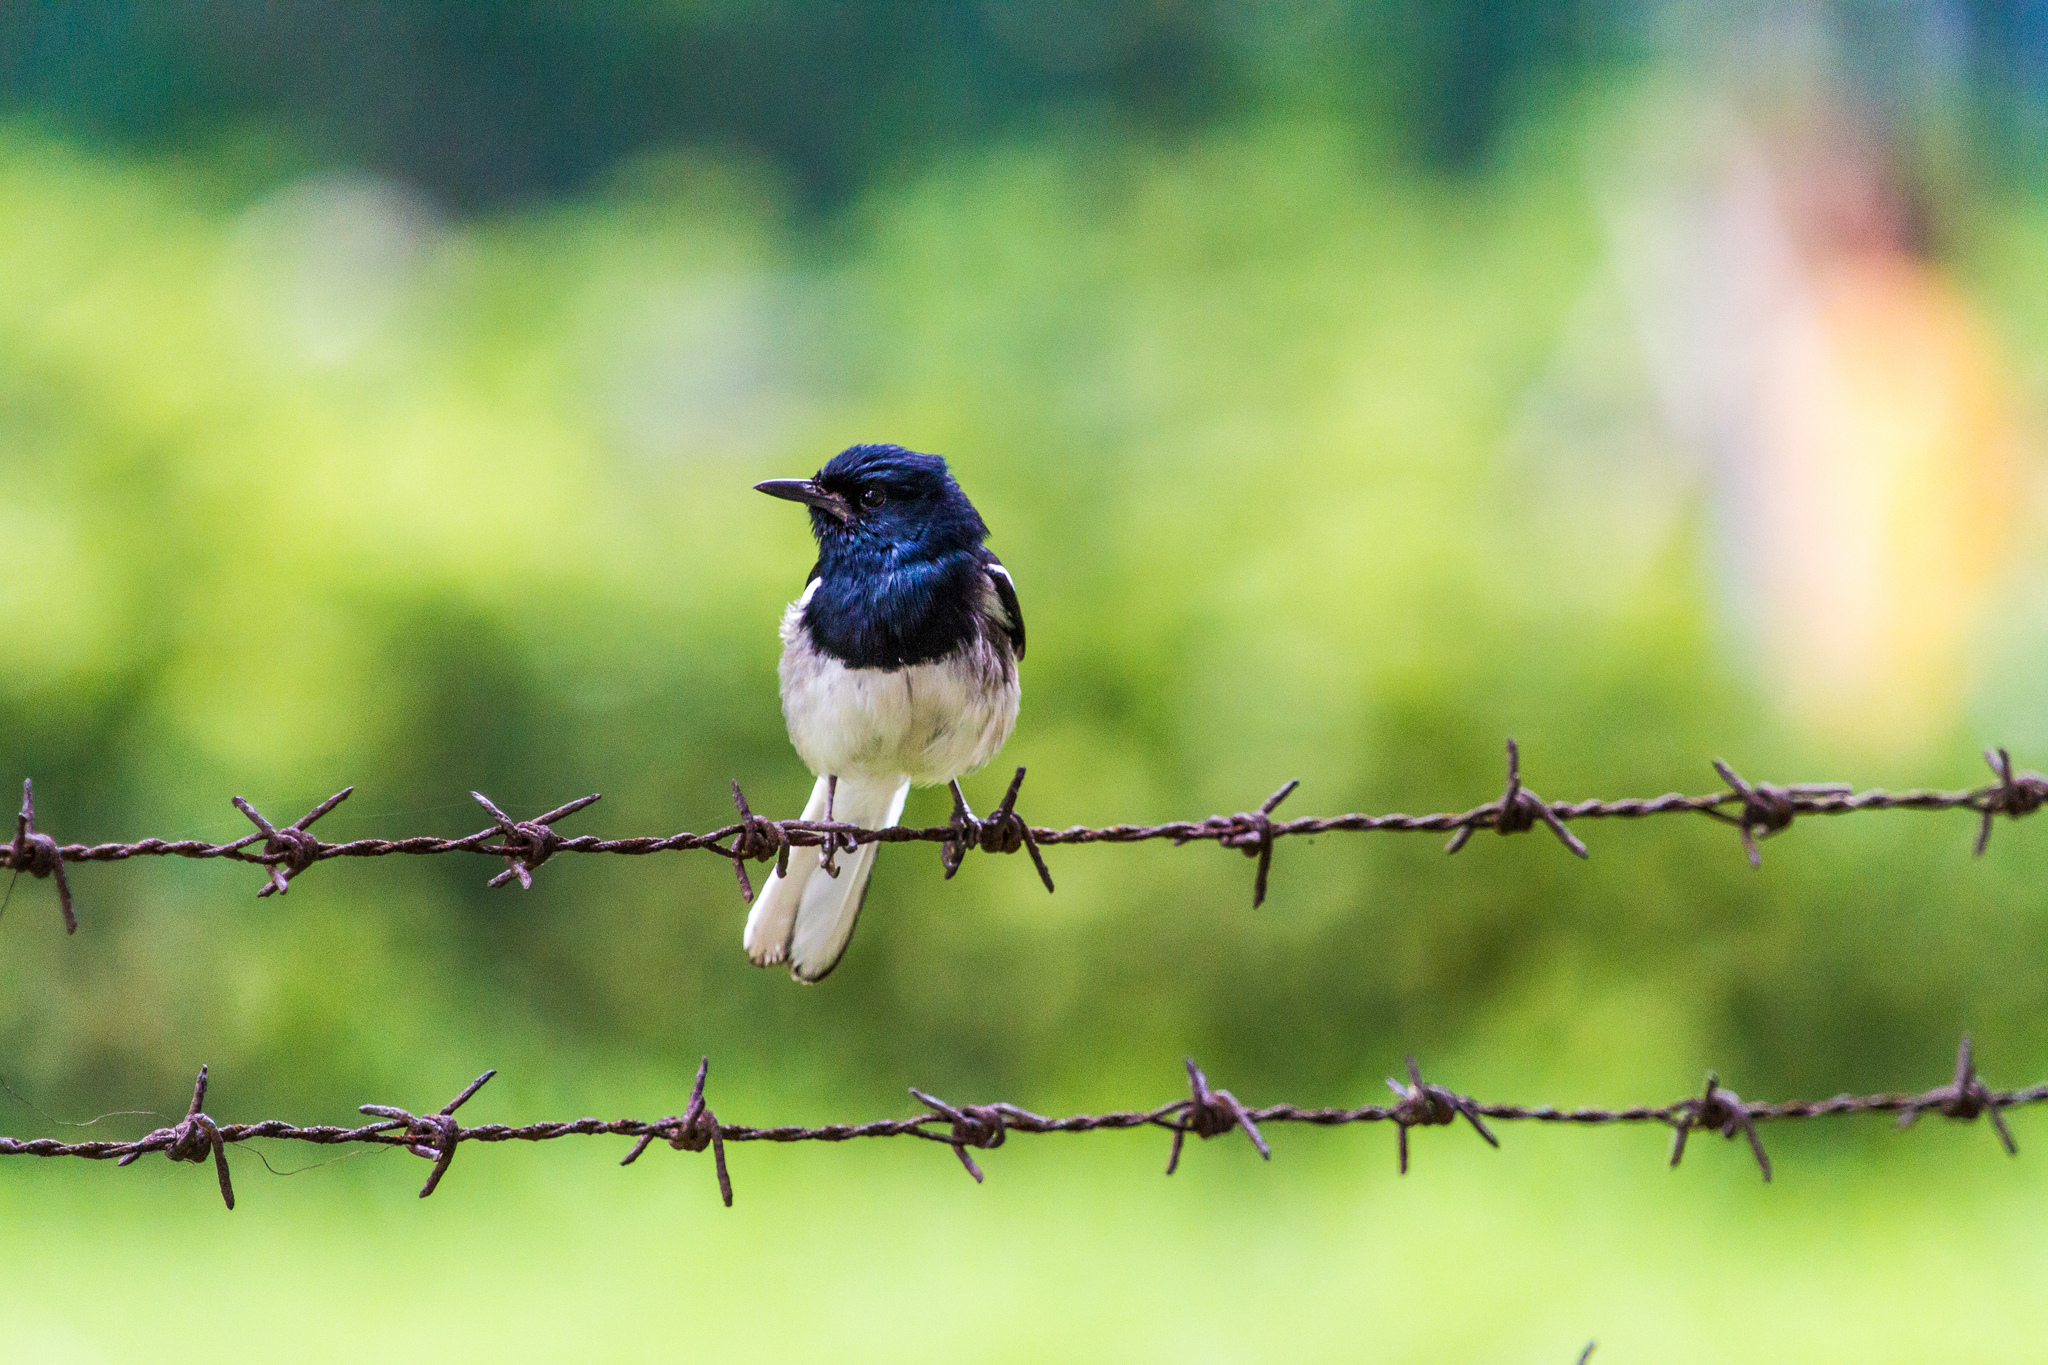 Oriental Magpie Robin on Barbed Wire